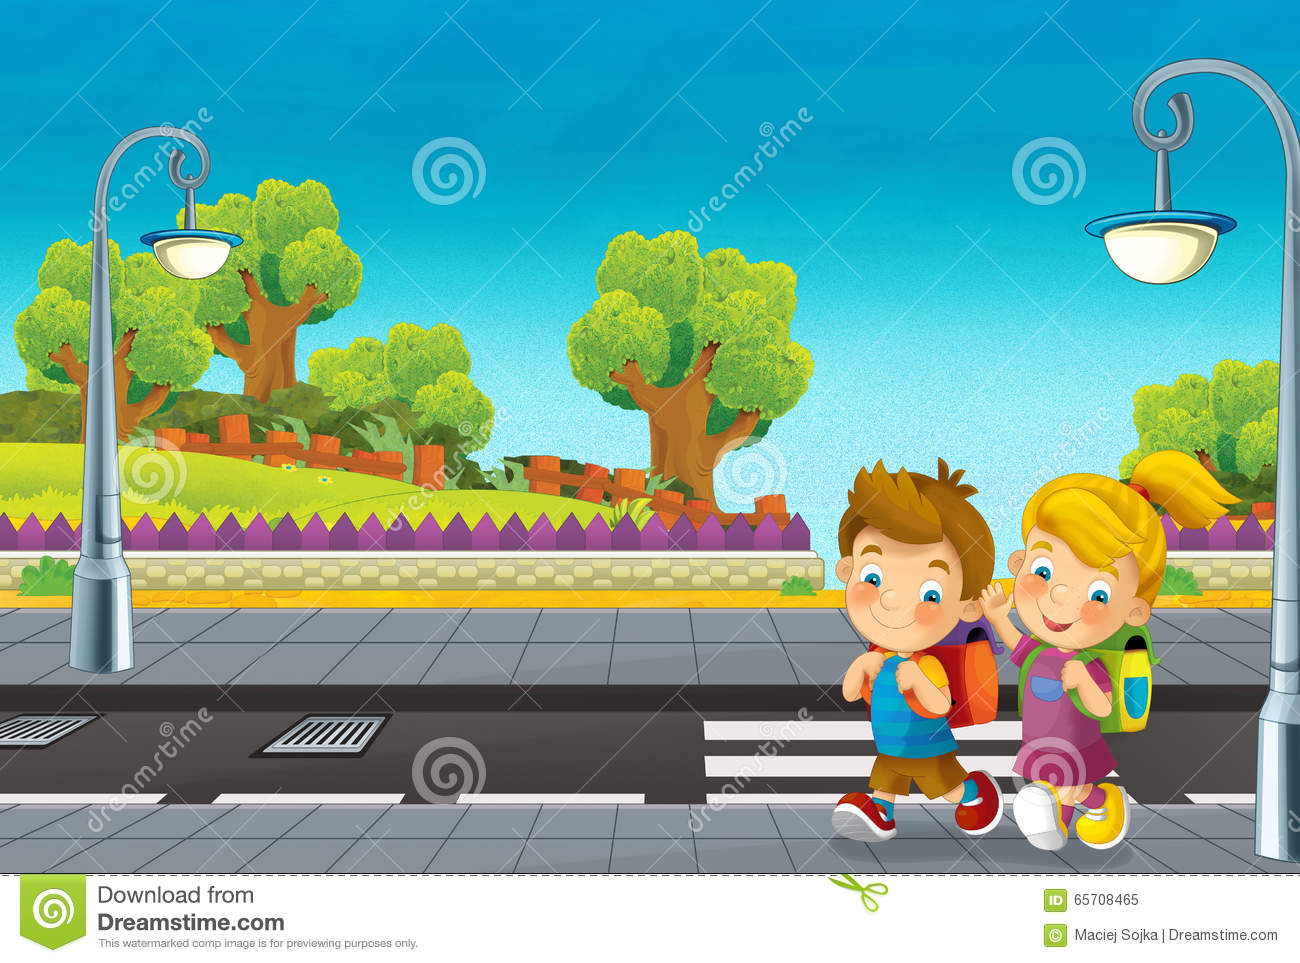 Walking On Road Clipart.